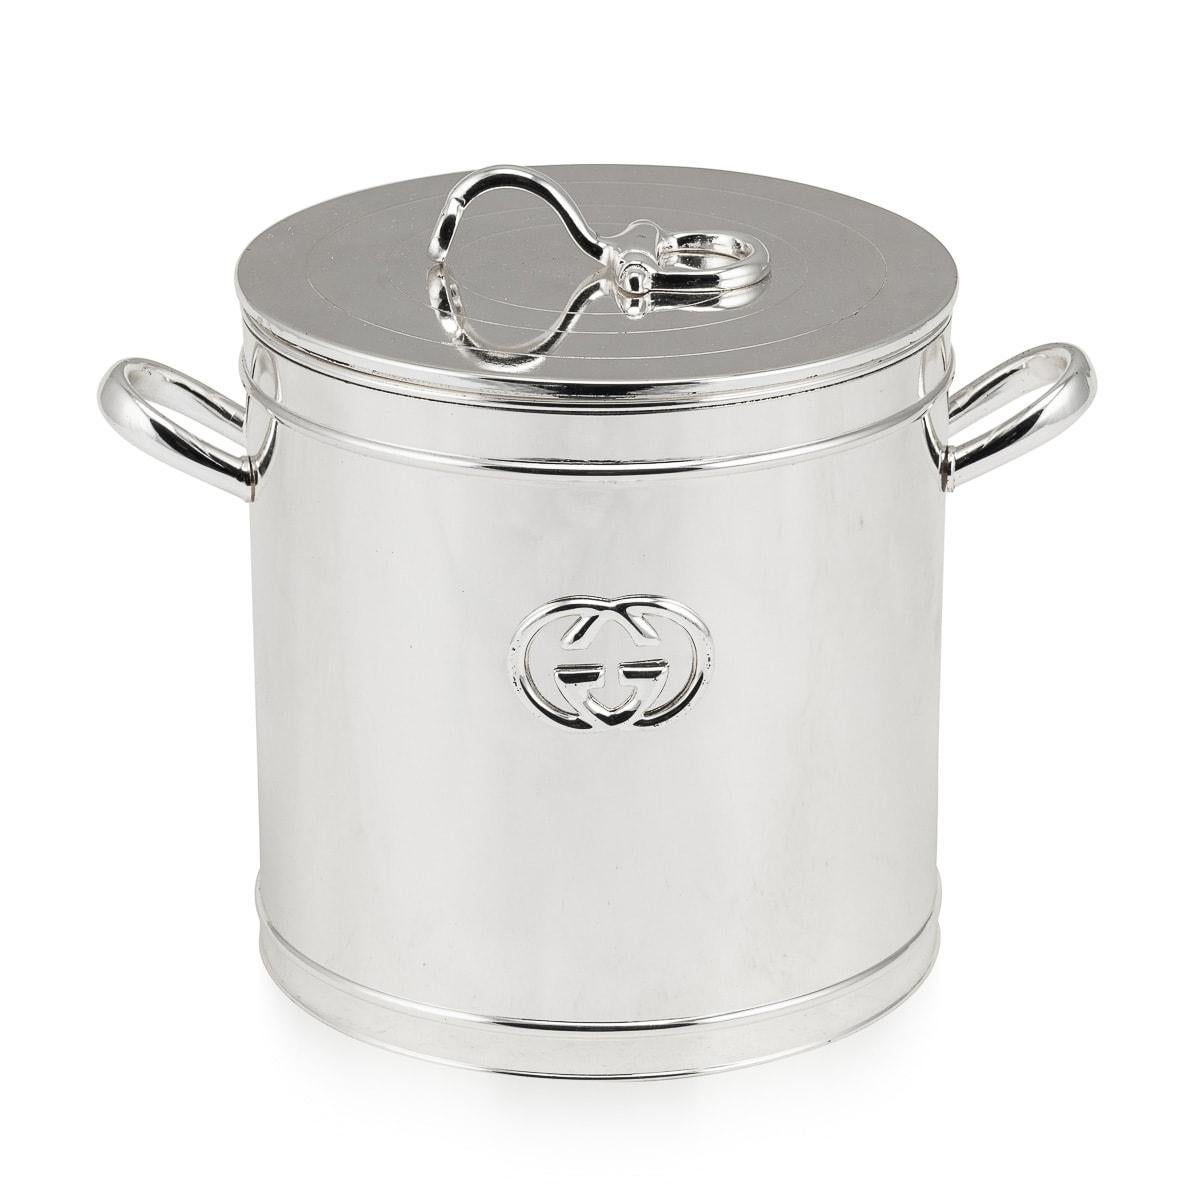 Mid-Century Modern 20th Century Silver Plated Gucci Ice Bucket, Italy c.1980